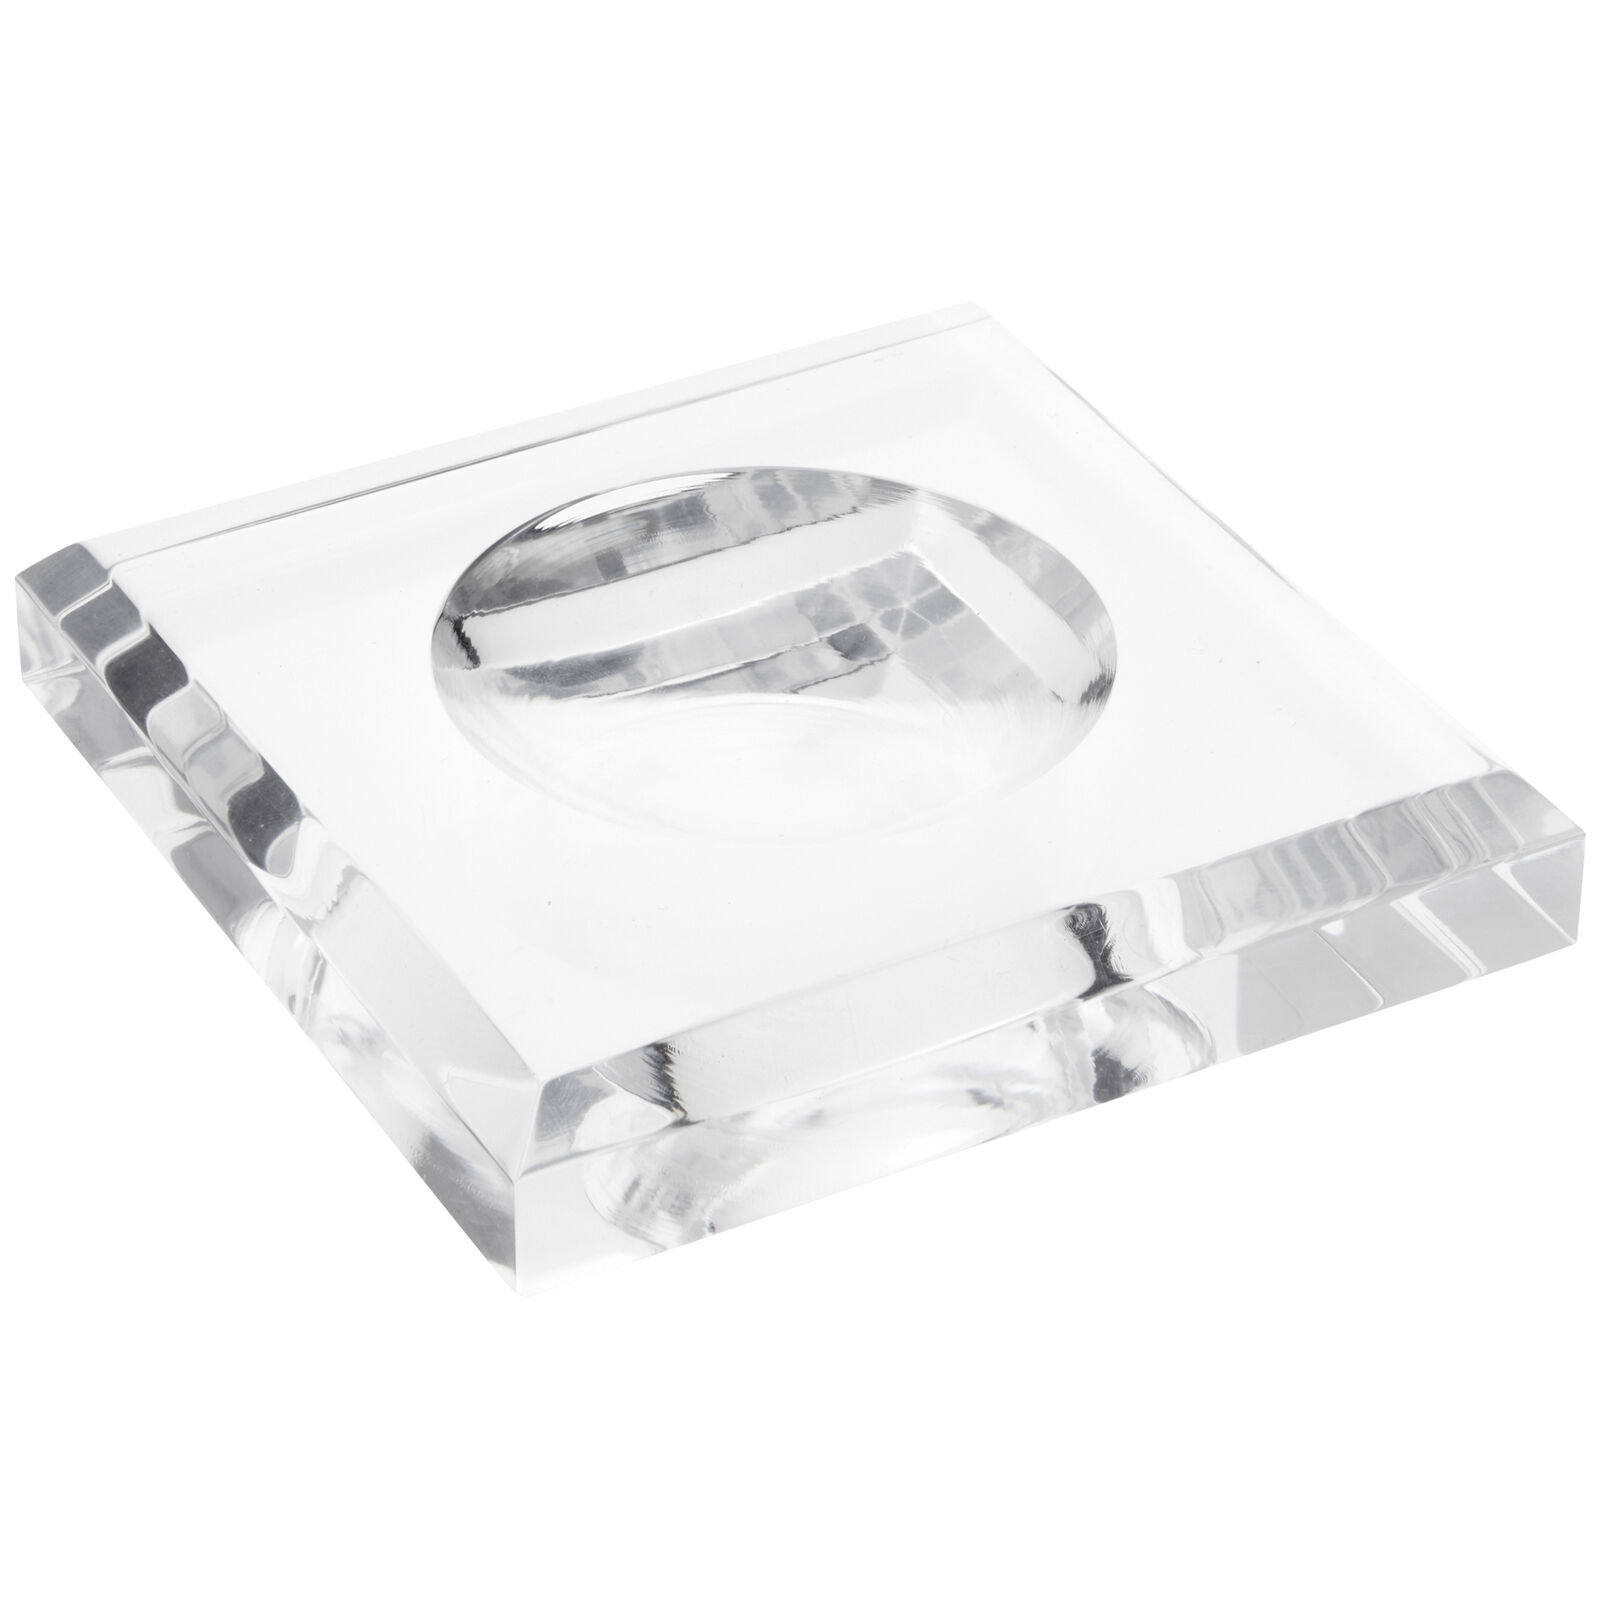 Plymor Acrylic Square Base W/ Indented Circle, 0.75" H X 4" W X 4" D (2 Pack)